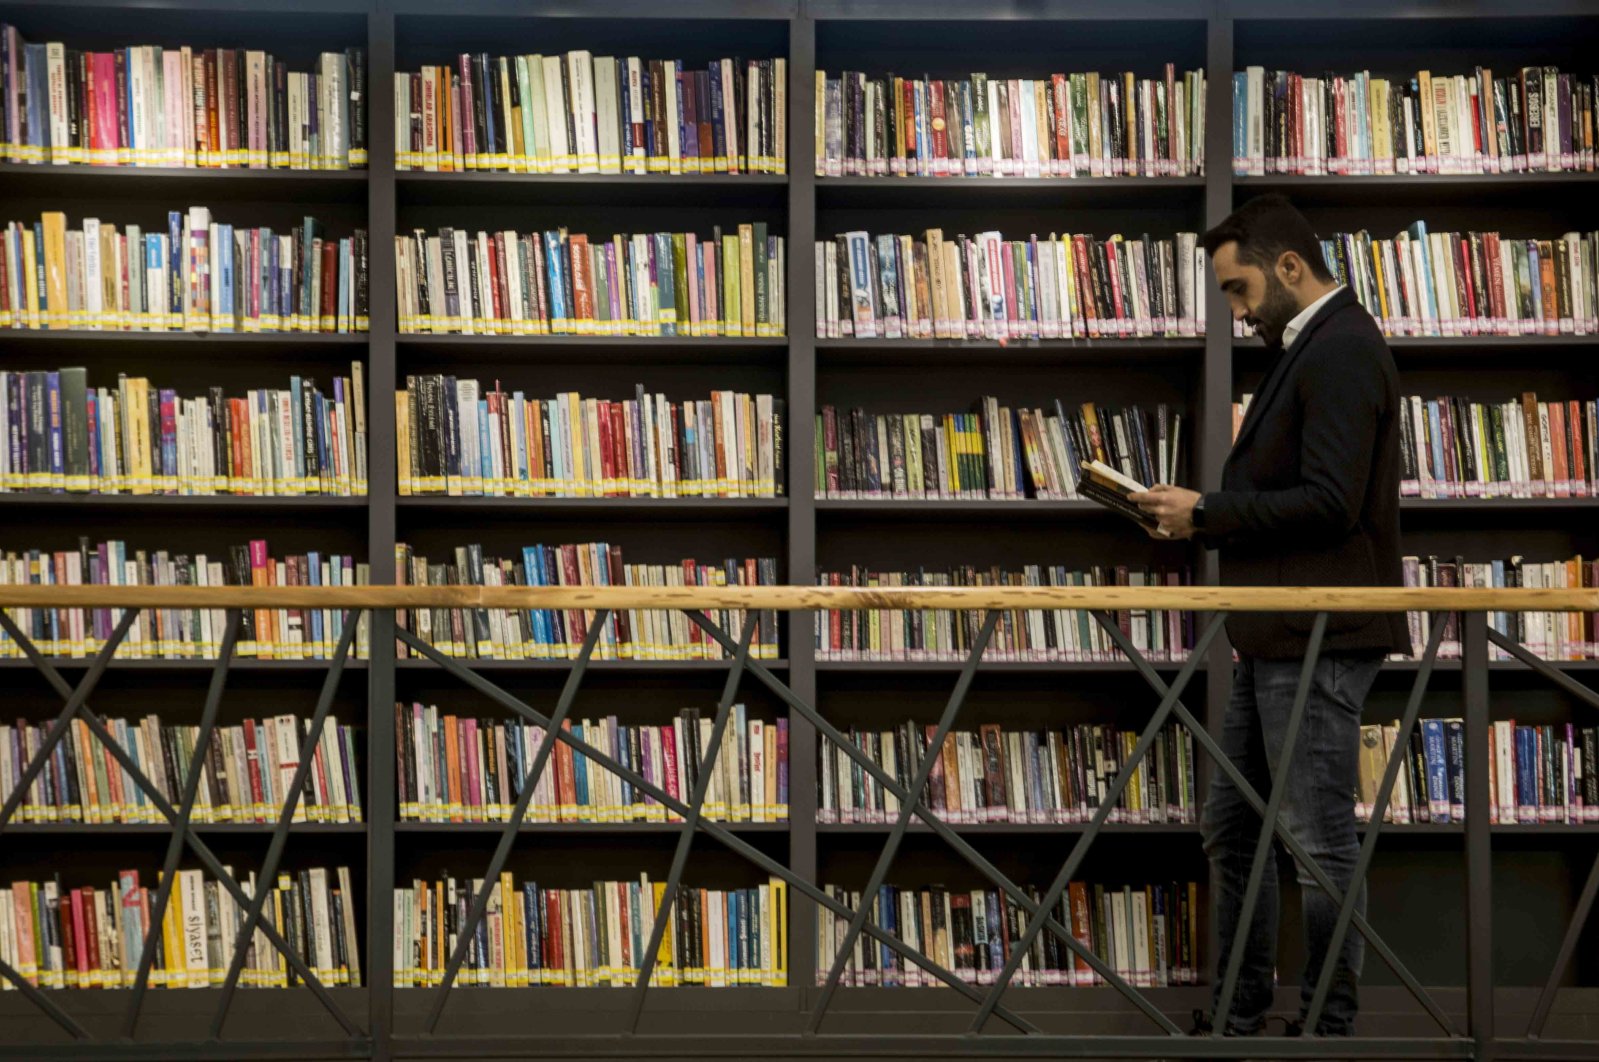 A man is seen at a public library in the southeastern province of Batman, Turkey, Nov. 11, 2020. (Photo by Orhan Kartal)